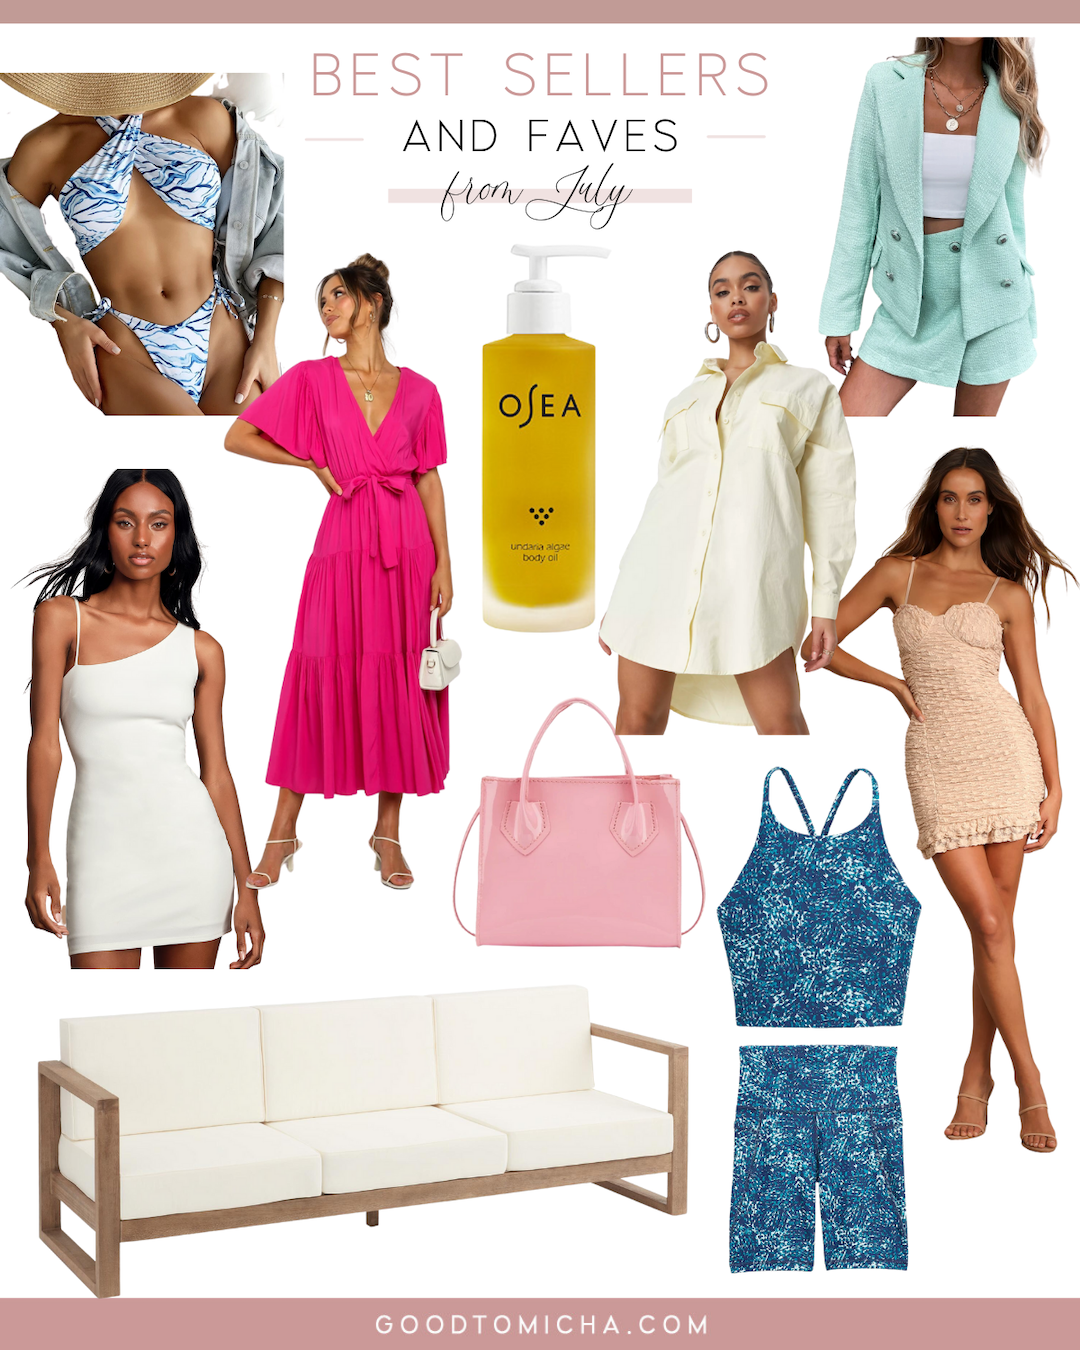 a collage of July Bestsellers with women's clothes and other items